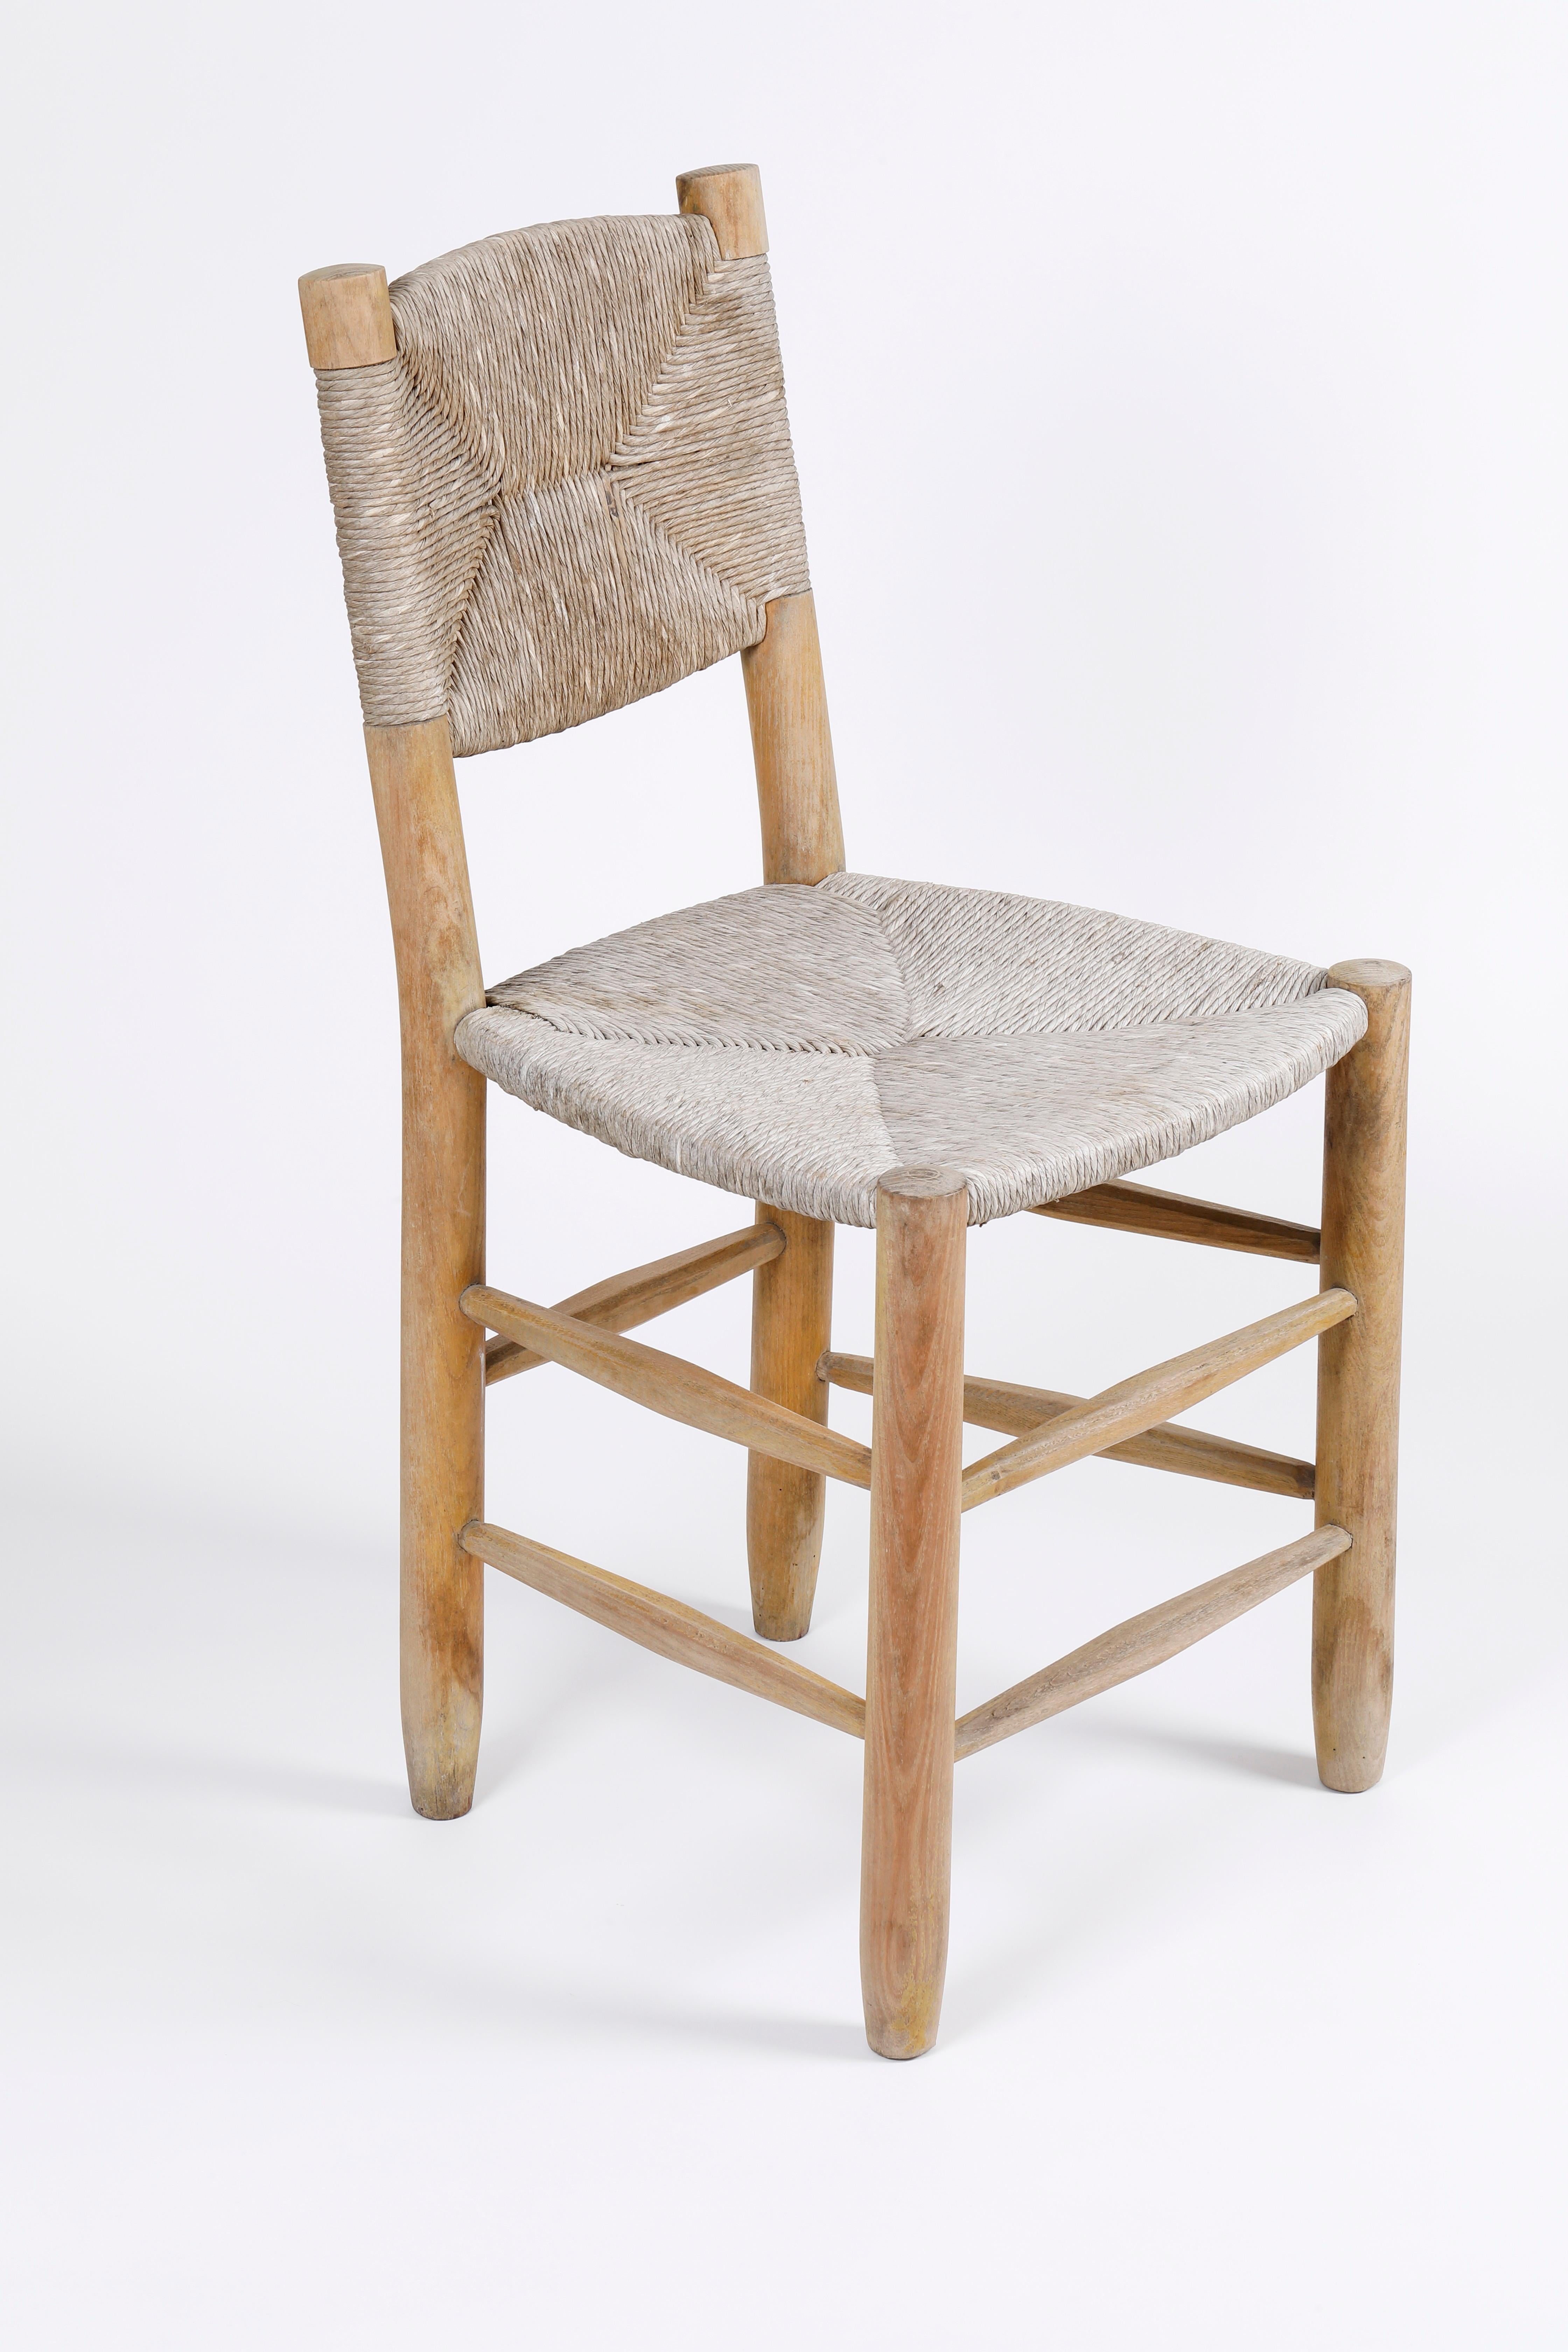 Bauche chair by Charlotte Perriand, model 19
France, 1950

In original condition with patina